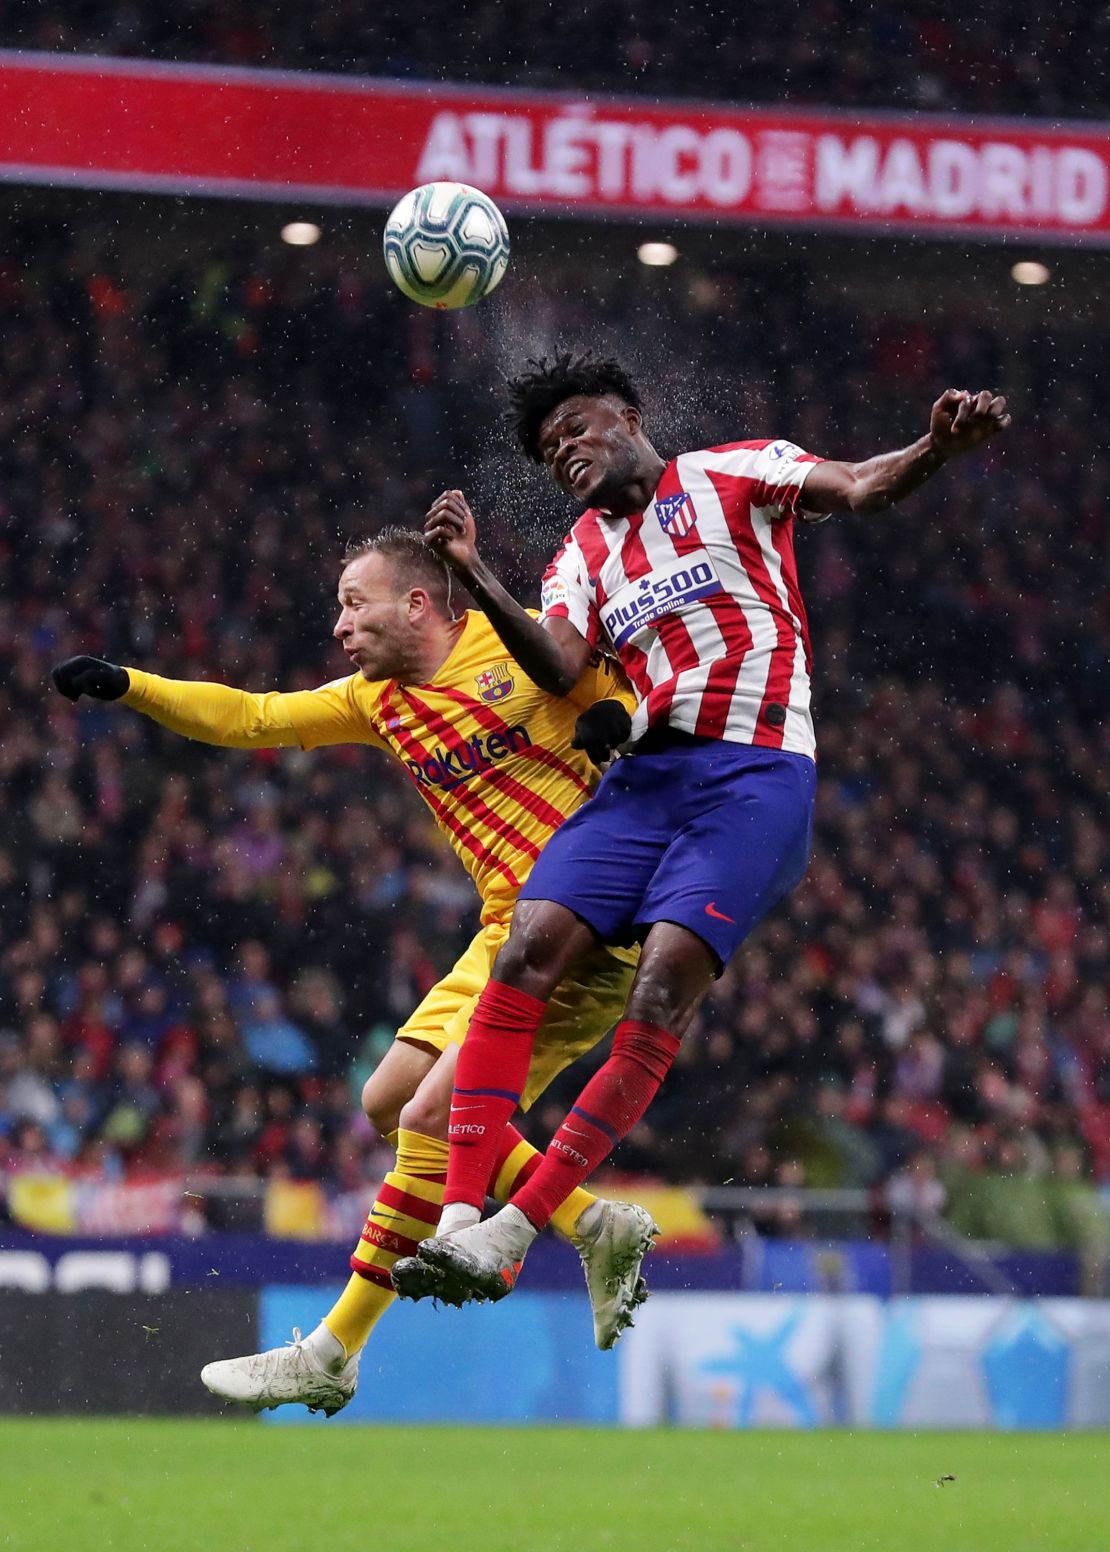 Thomas Partey of Atletico Madrid (R) and Arthur of FC Barcelona jump for the ball.